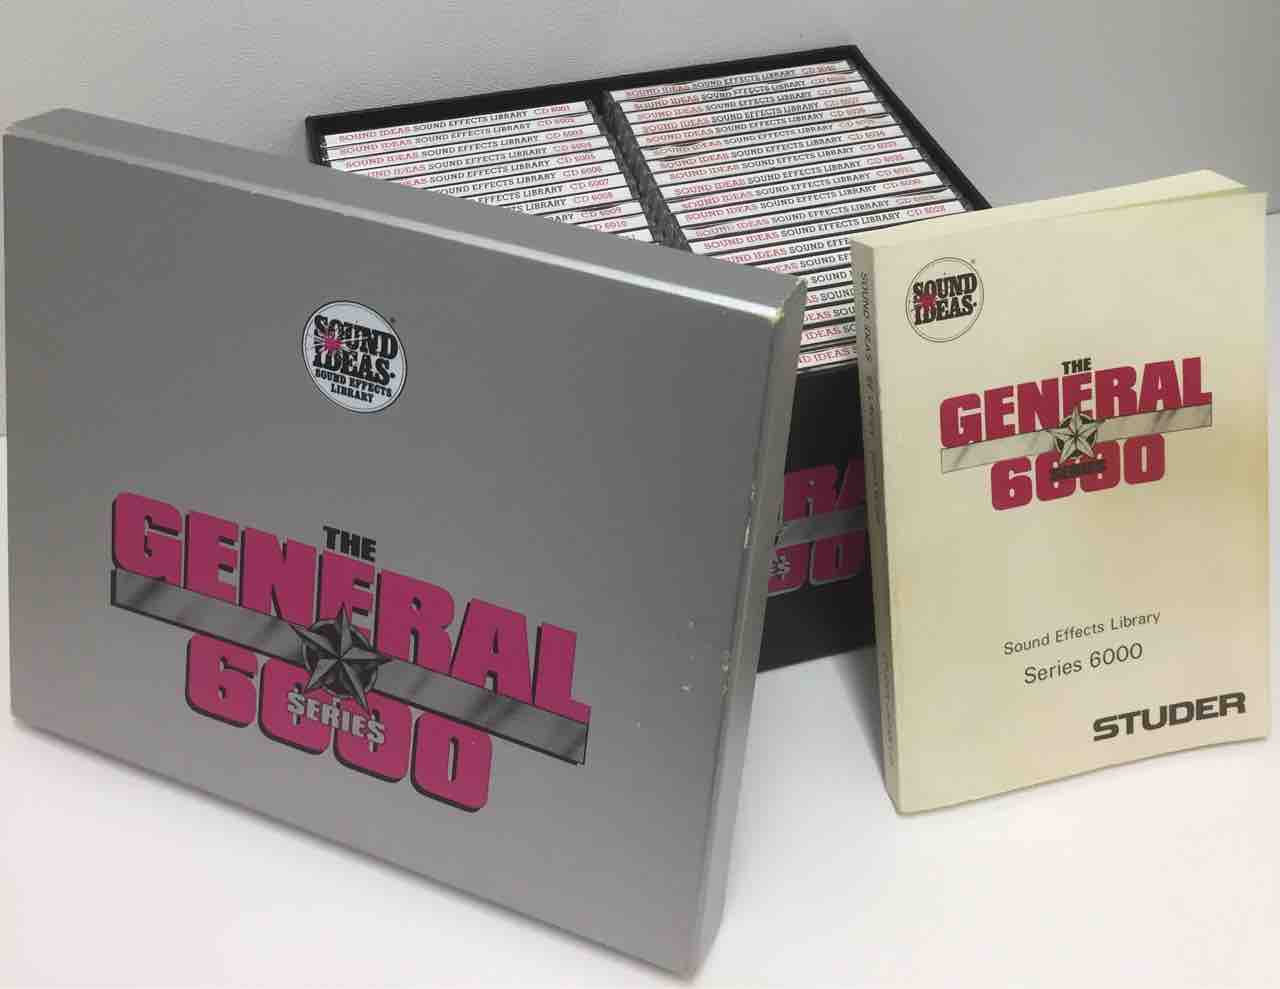 SOUND IDEAS / SERIES6000 THE GENERAL EXTENSION 2 / SERIES6000 THE GENERAL EXTENSION 2